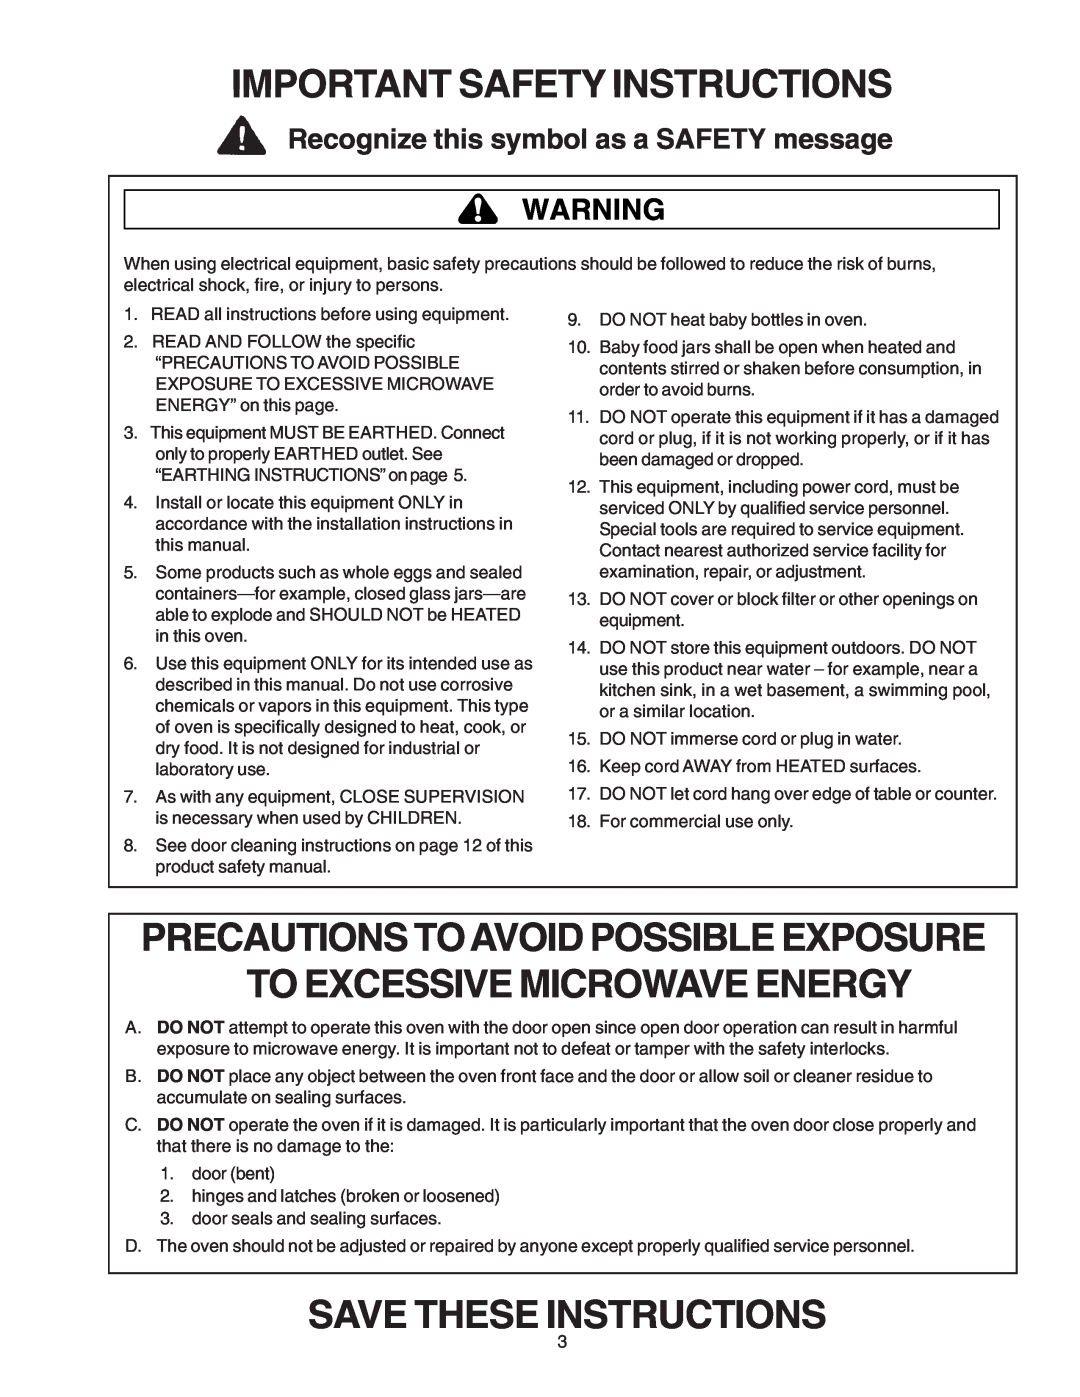 Amana Commercial Microwave Oven owner manual Important Safety Instructions, Save These Instructions 